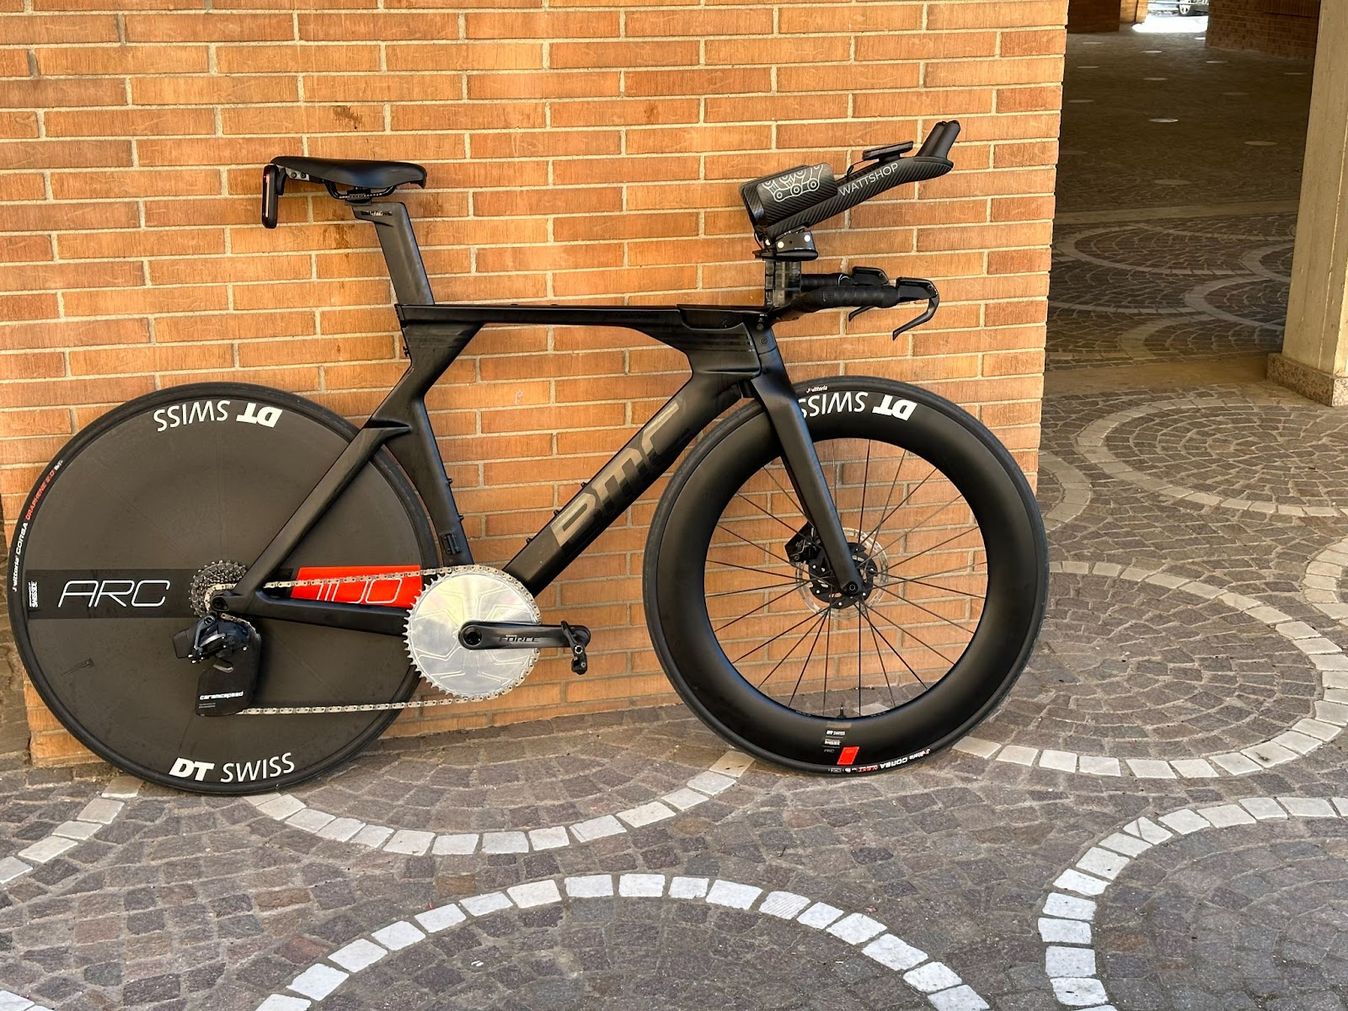 The chainring alone on this BMC Timemachine is enough to attract your attention, we don't see many TT bikes in the vault and we are big fans of this one